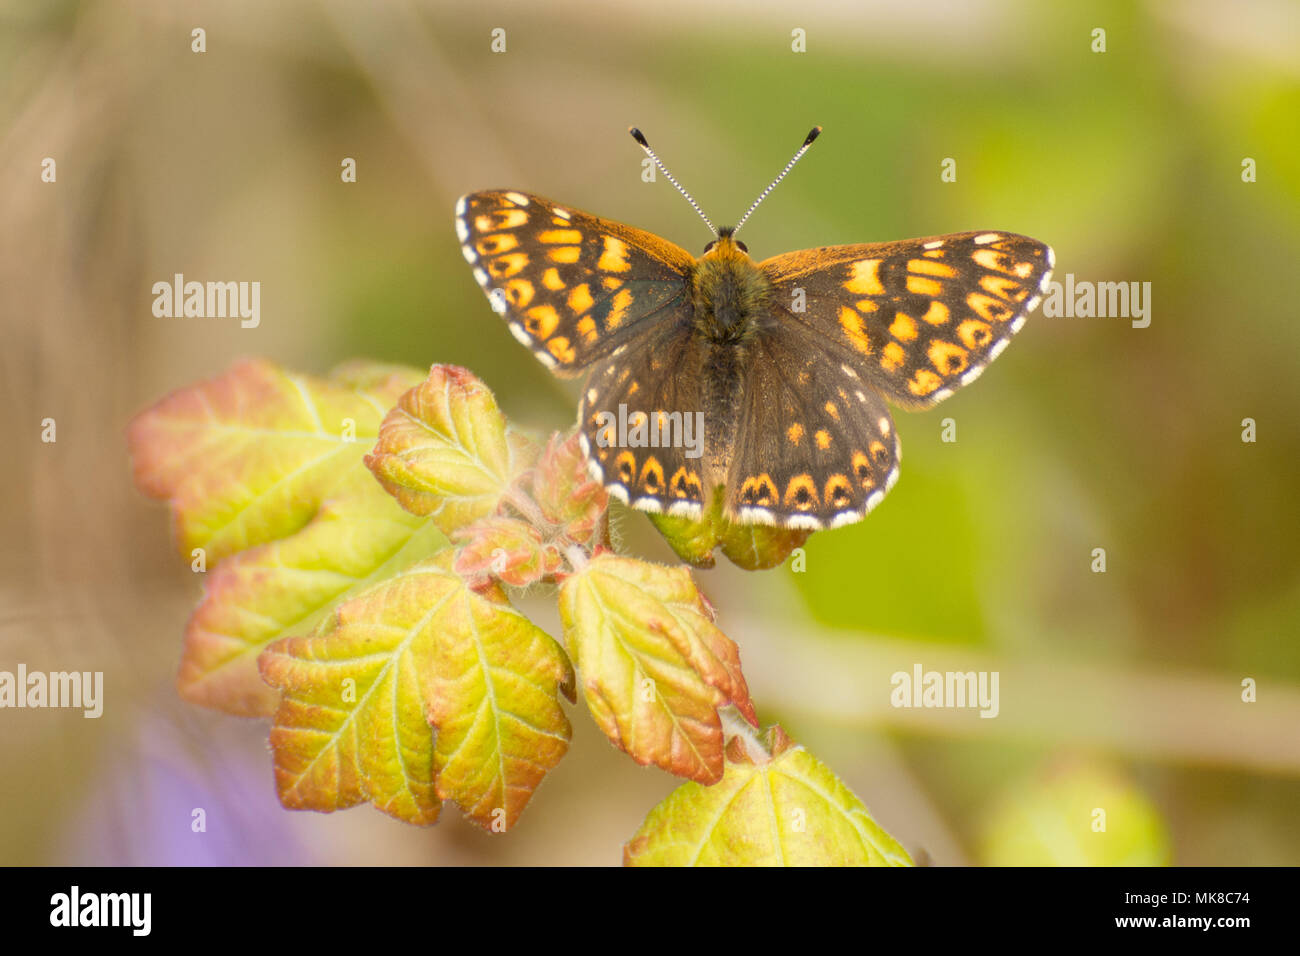 Duke of burgundy butterfly (Hamearis lucina) perched on a leaf at Noar Hill, Hampshire, UK Stock Photo